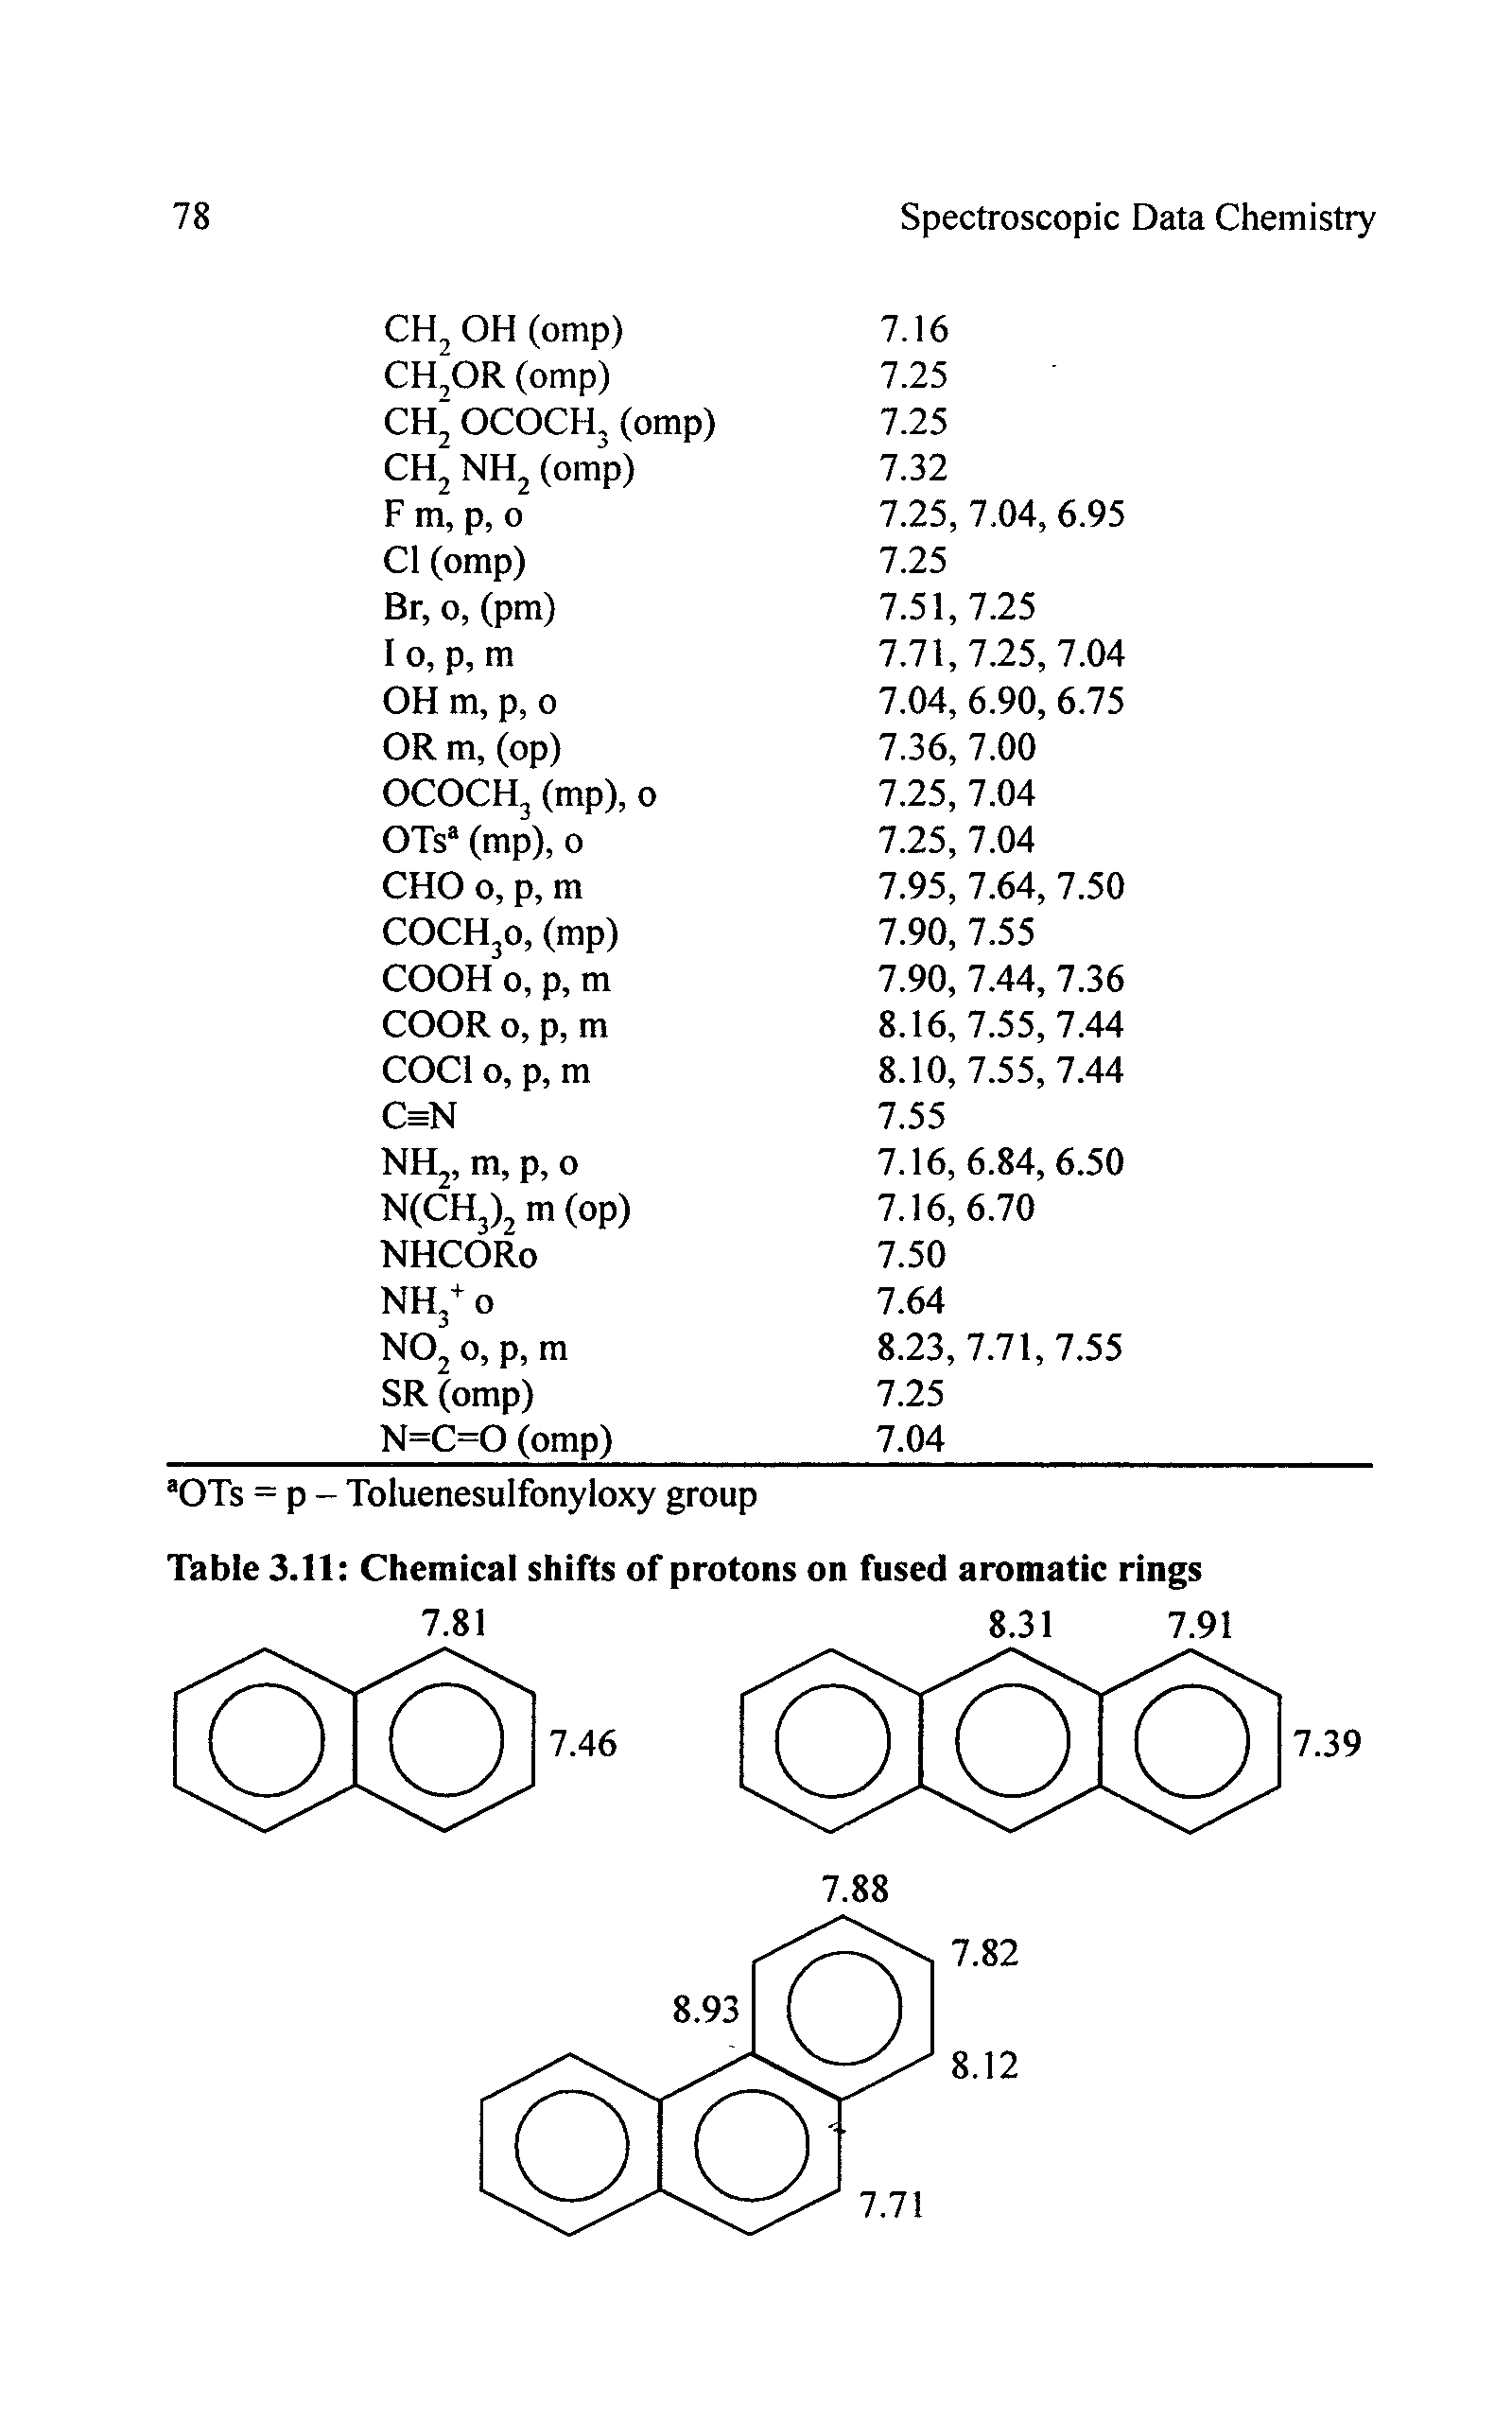 Table 3.11 Chemical shifts of protons on fused aromatic rings 7.81 8.31 7.91...